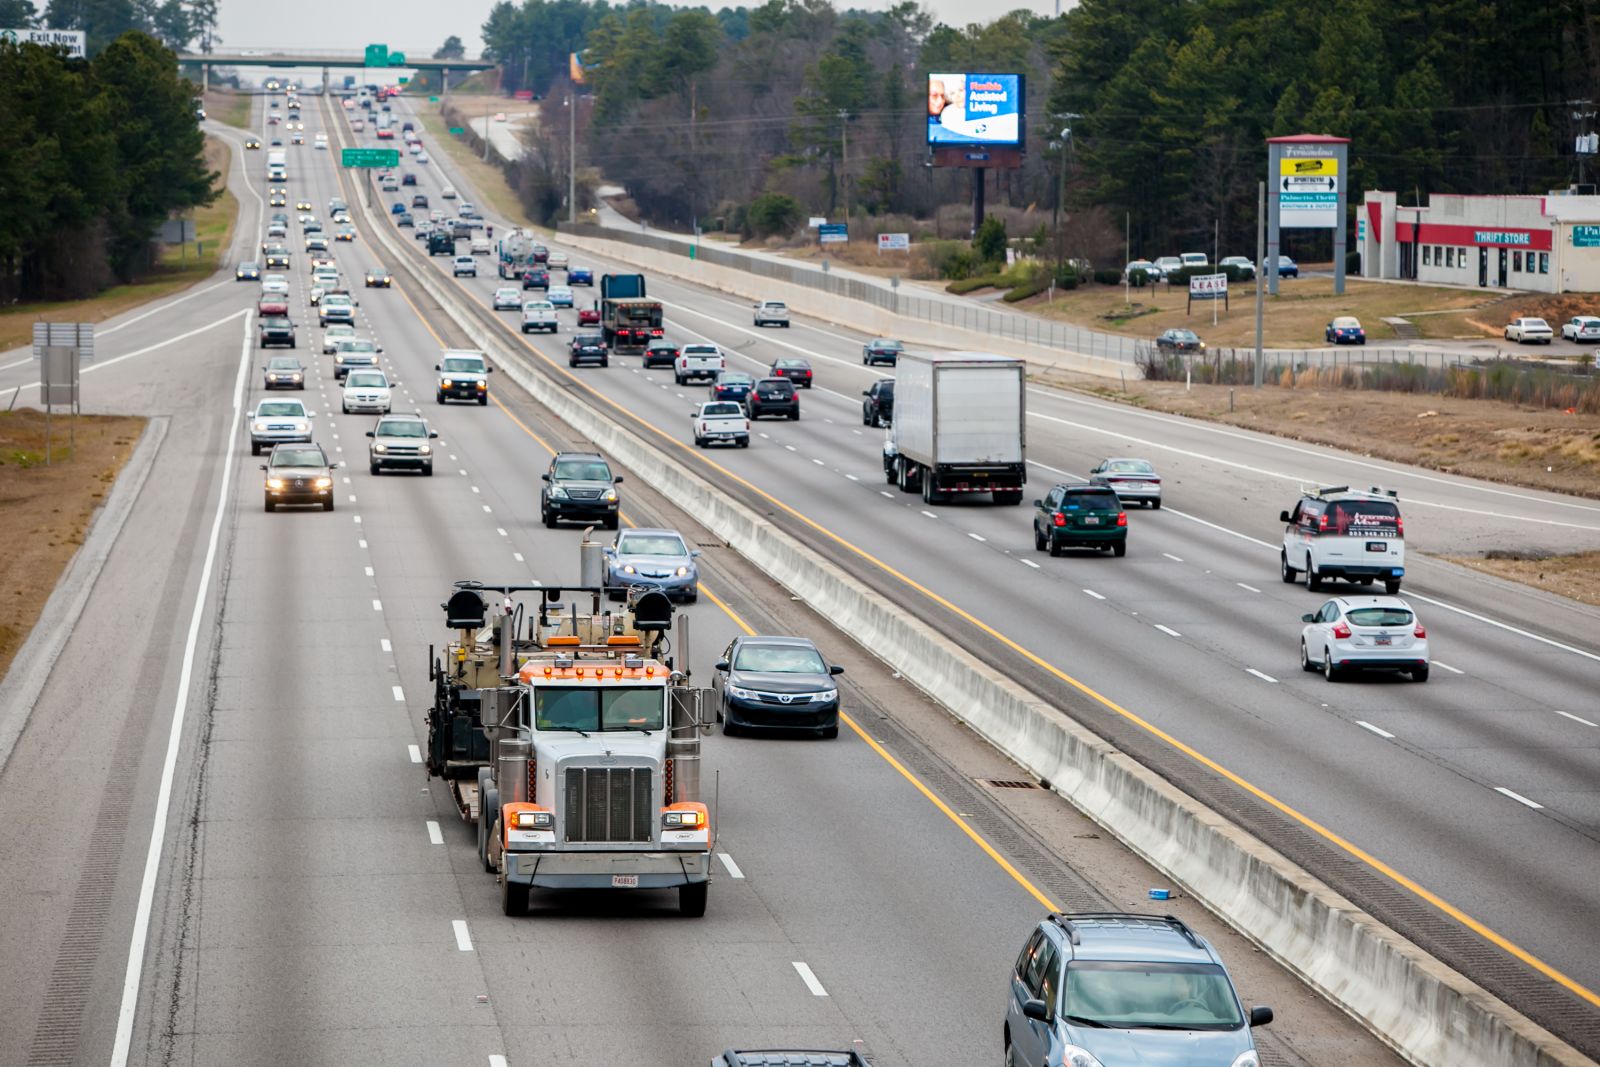 The S.C. Trucking Association says the U.S. needs 50,000 drivers now to meet the current demand for truck drivers. (Photo/File)